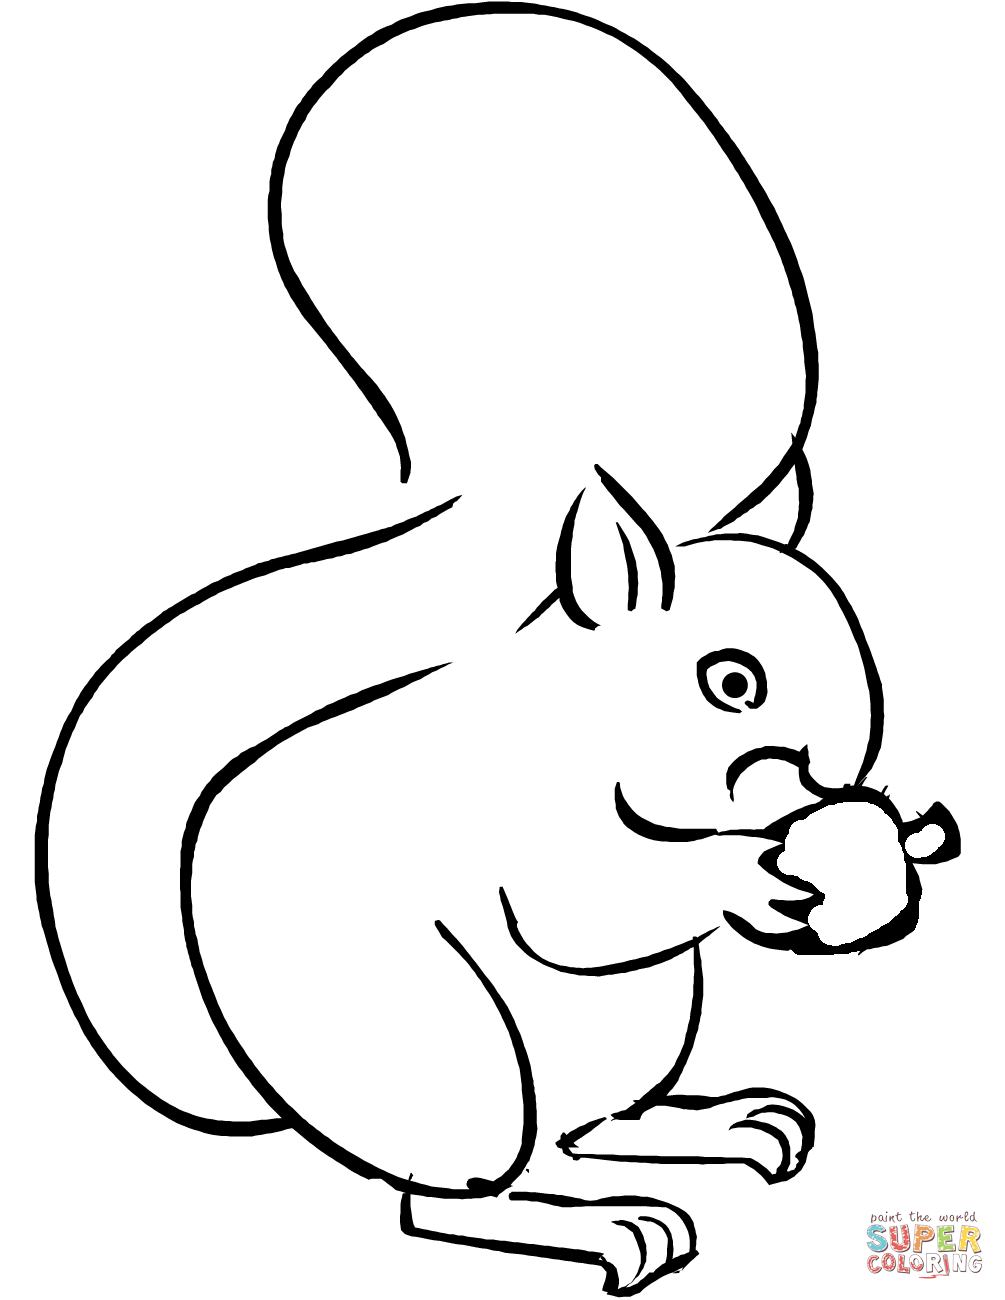 Squirrel Outline Drawing at GetDrawings Free download